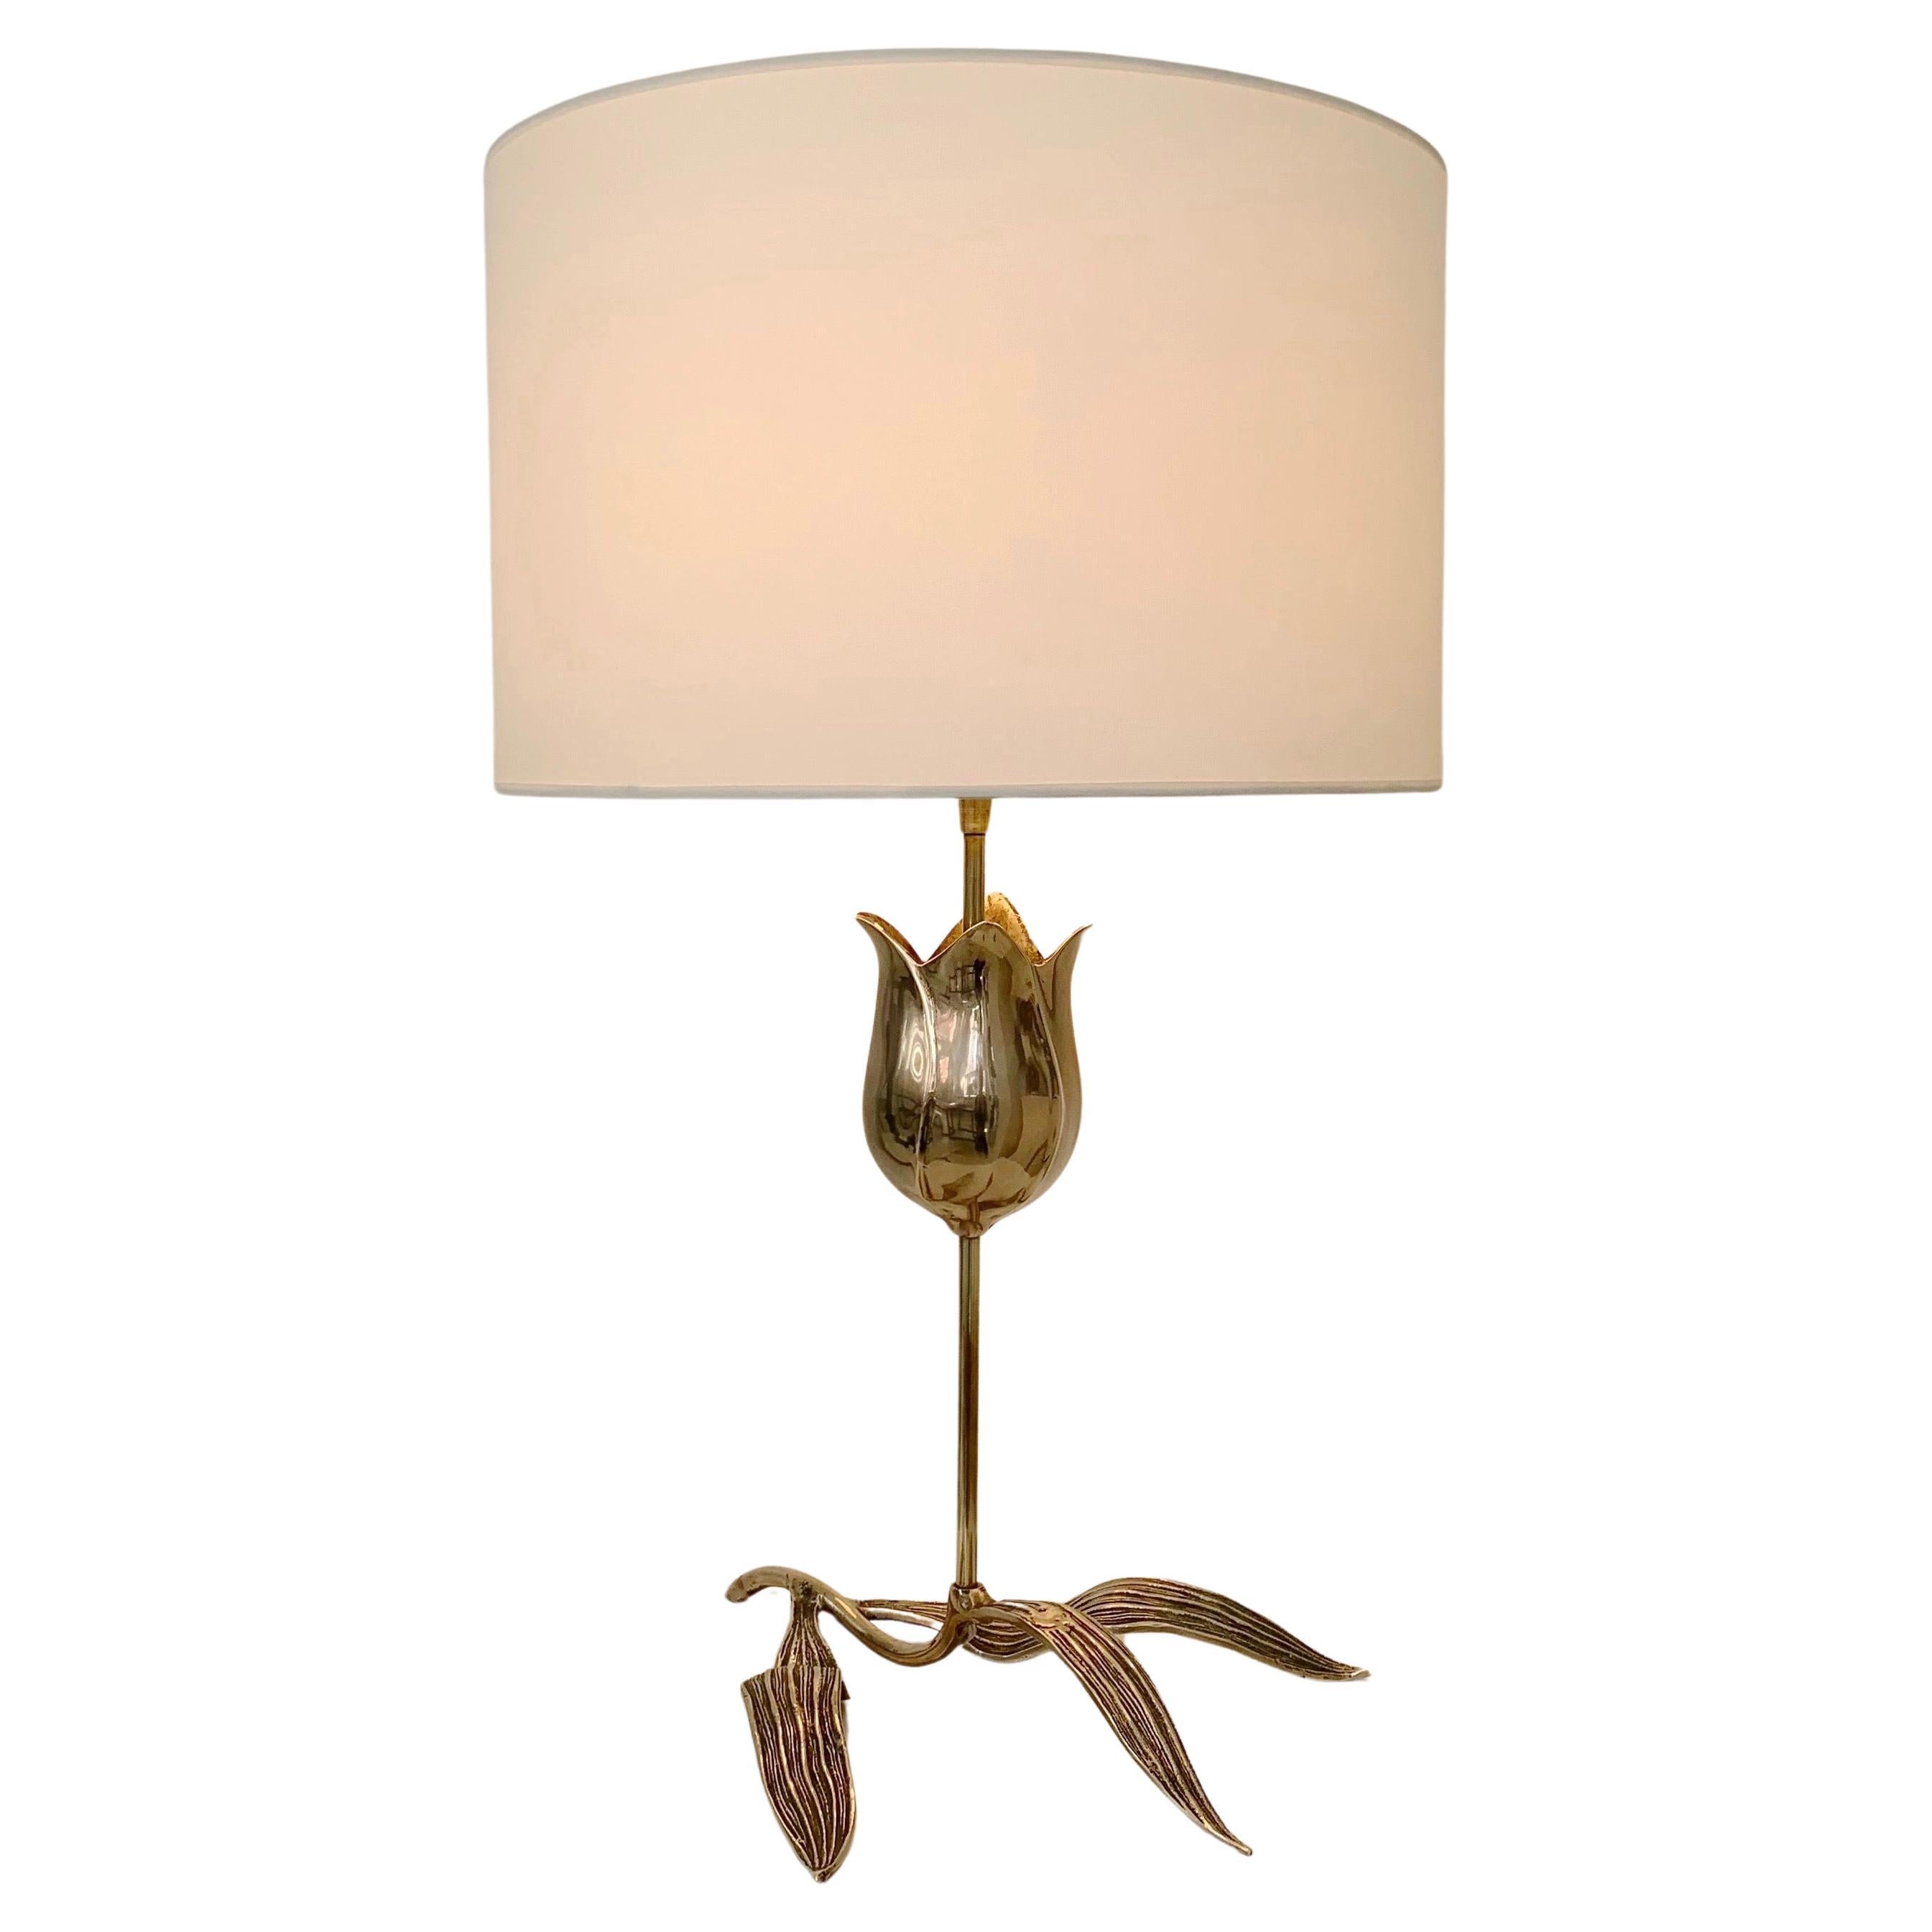 Mid-Century Bronze Flower and Leaves Table Lamp, circa 1970, France.